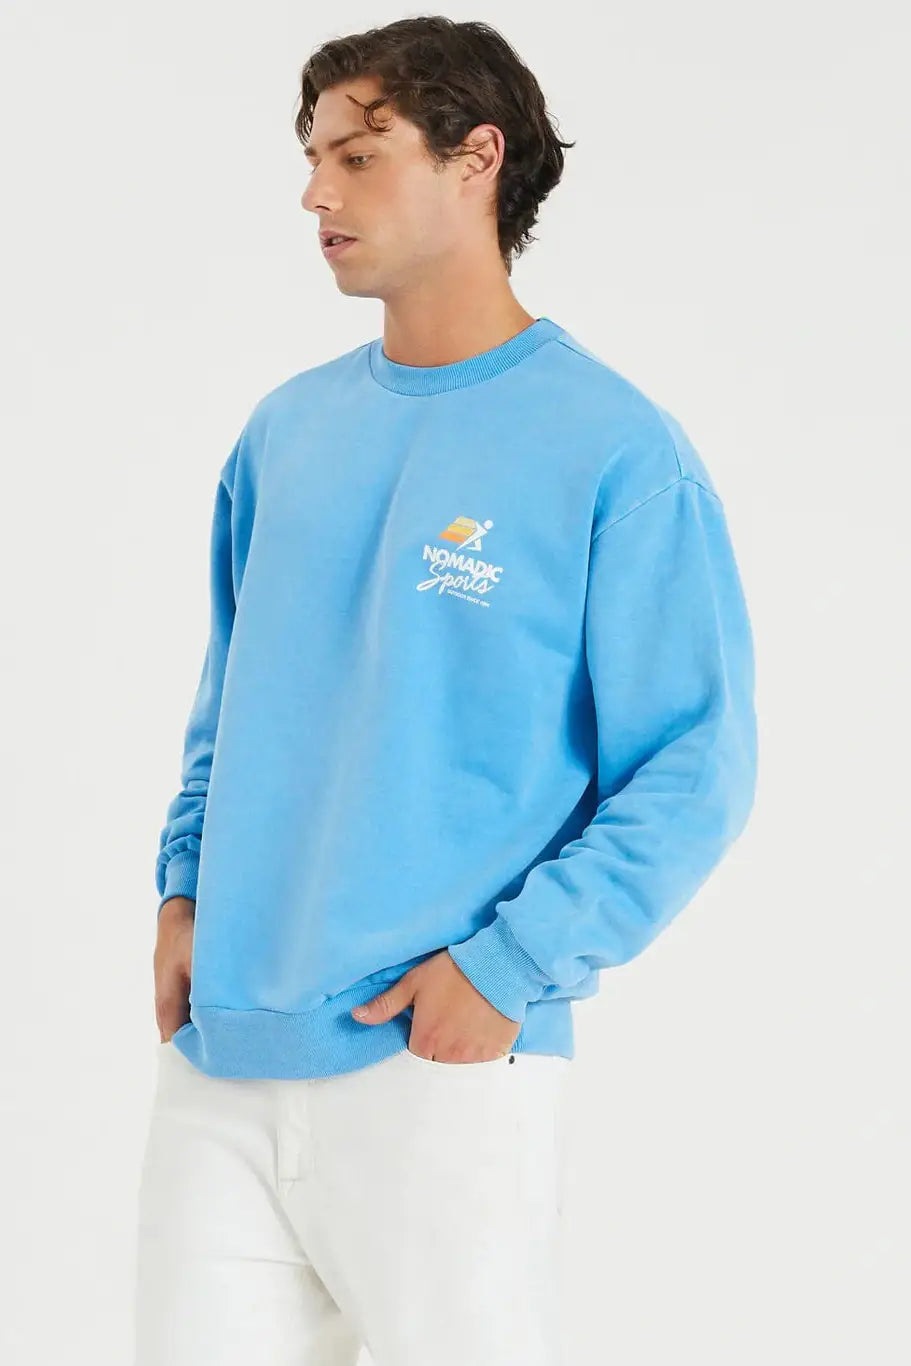 Nomadic paradise ymca relaxed sweater - pigment blue